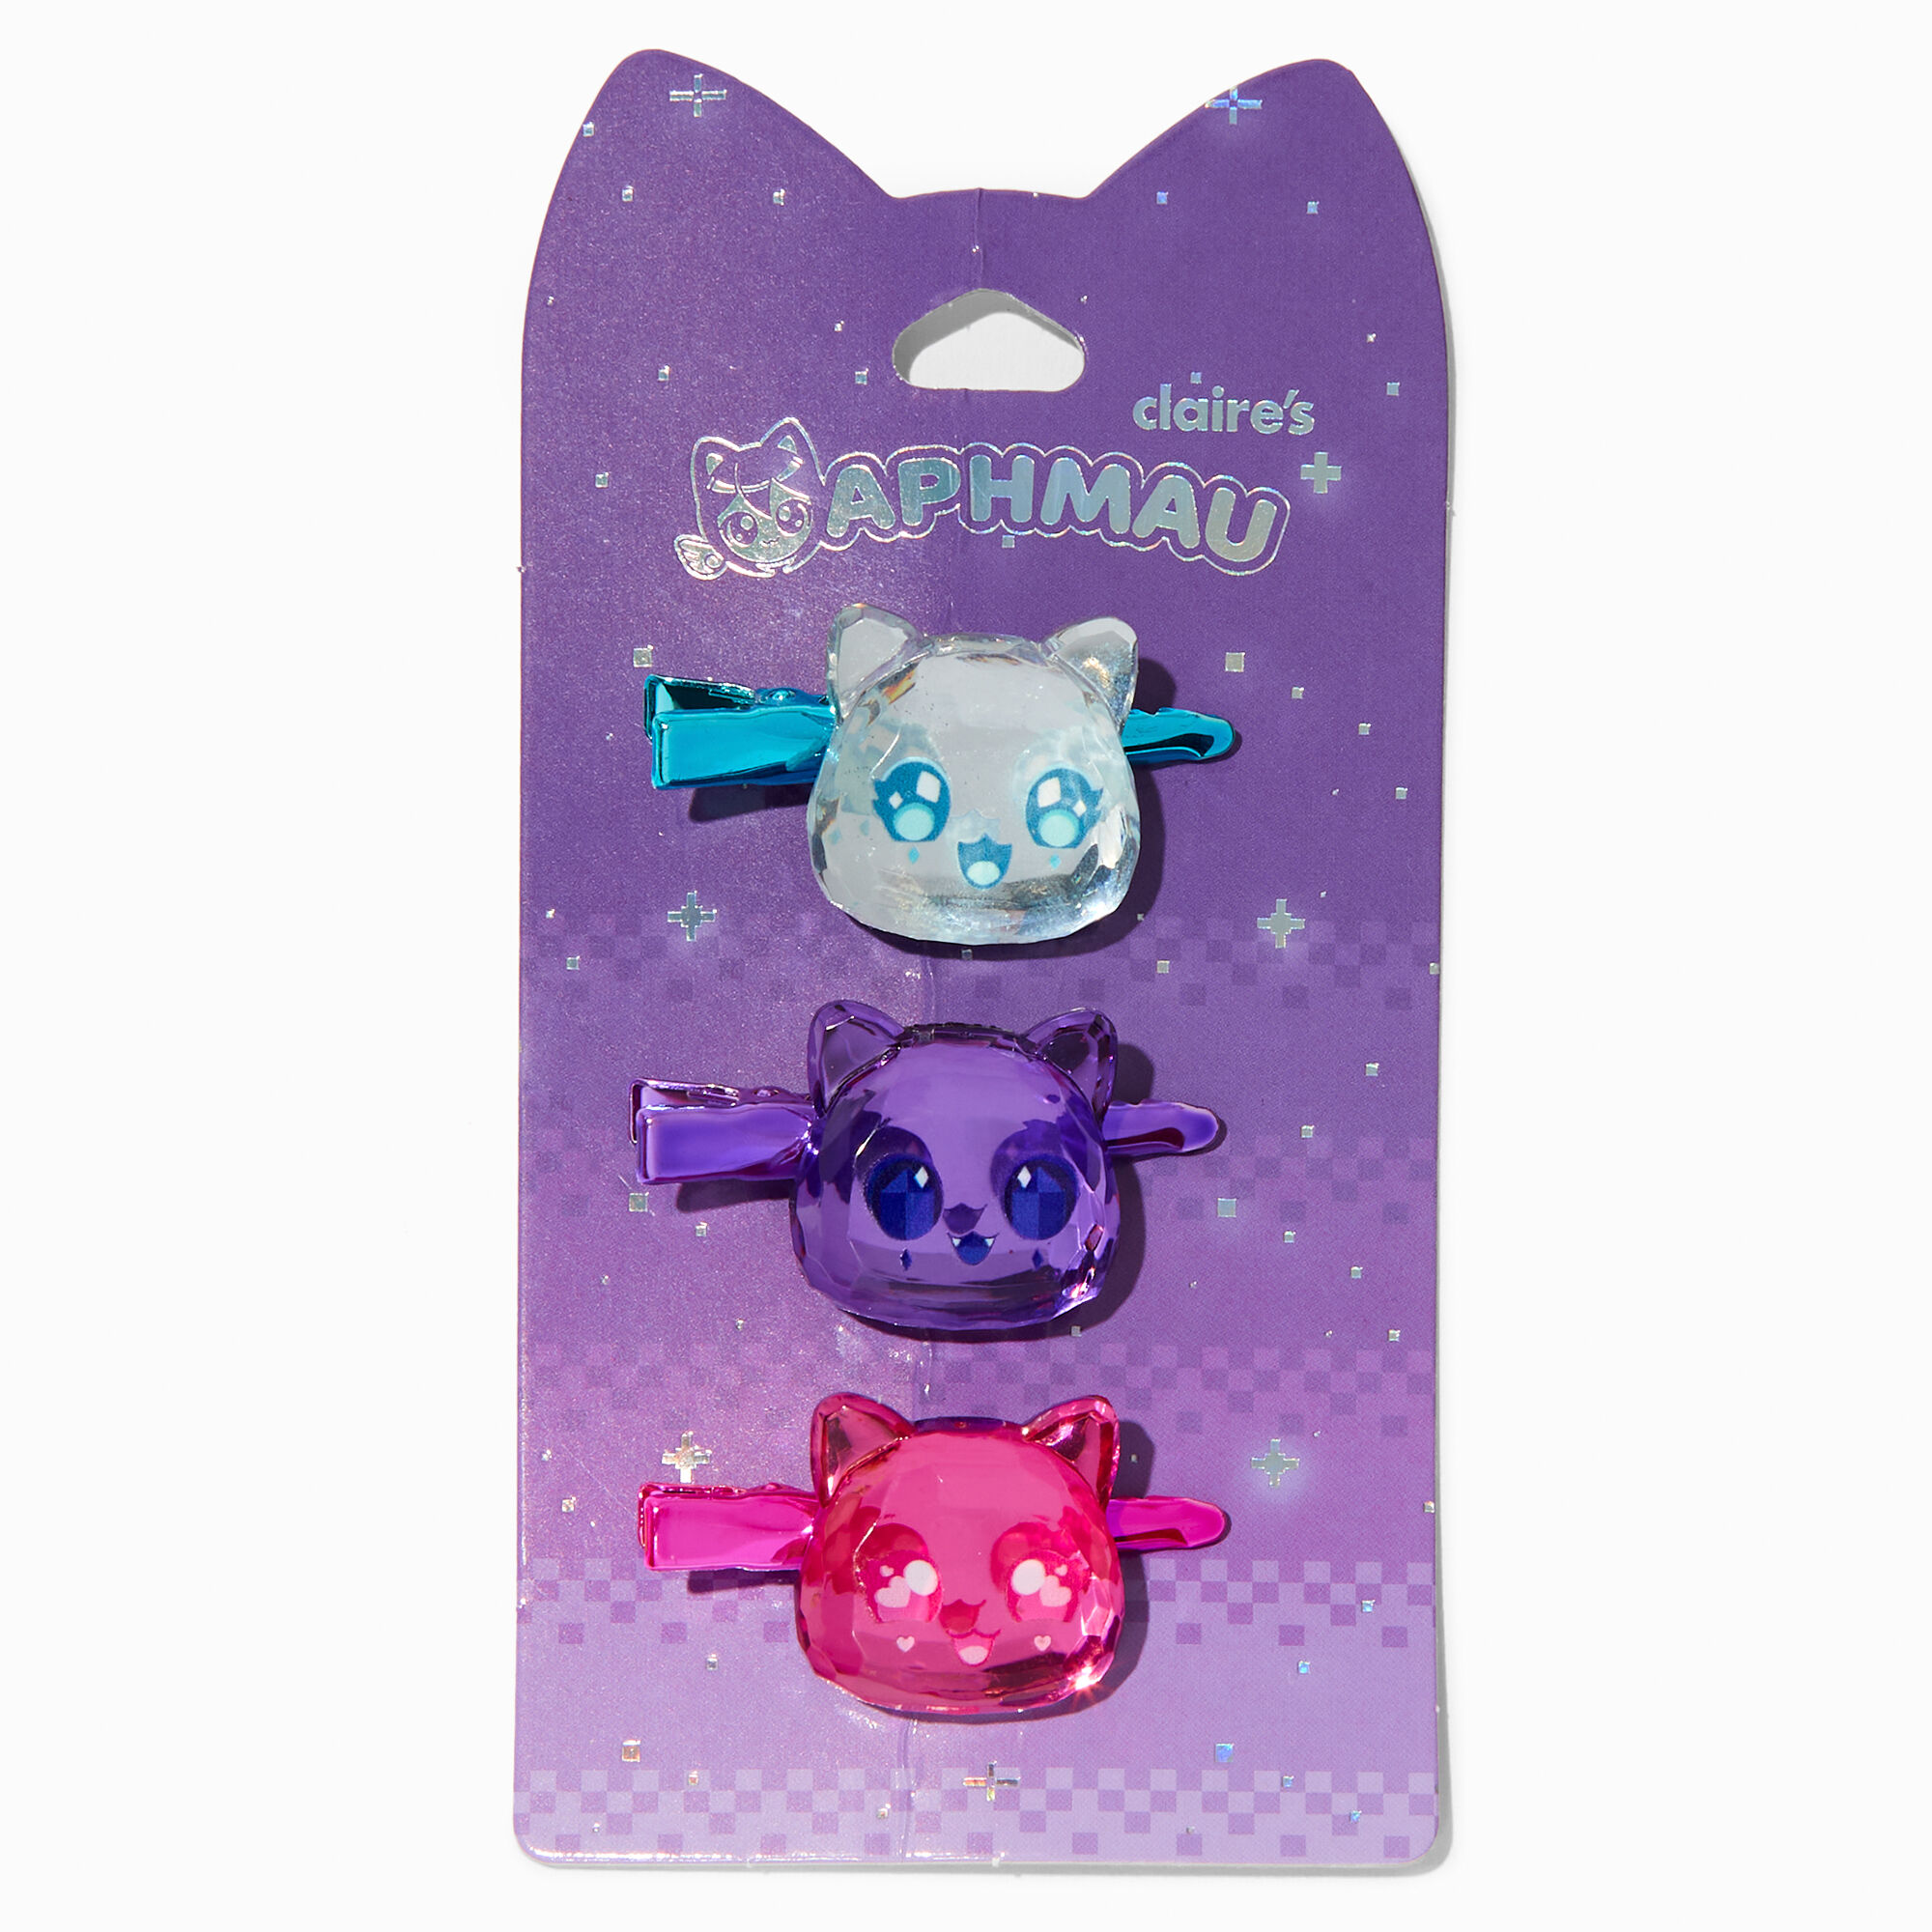 View Aphmau Claires Exclusive Cat Gem Hair Clips 3 Pack information